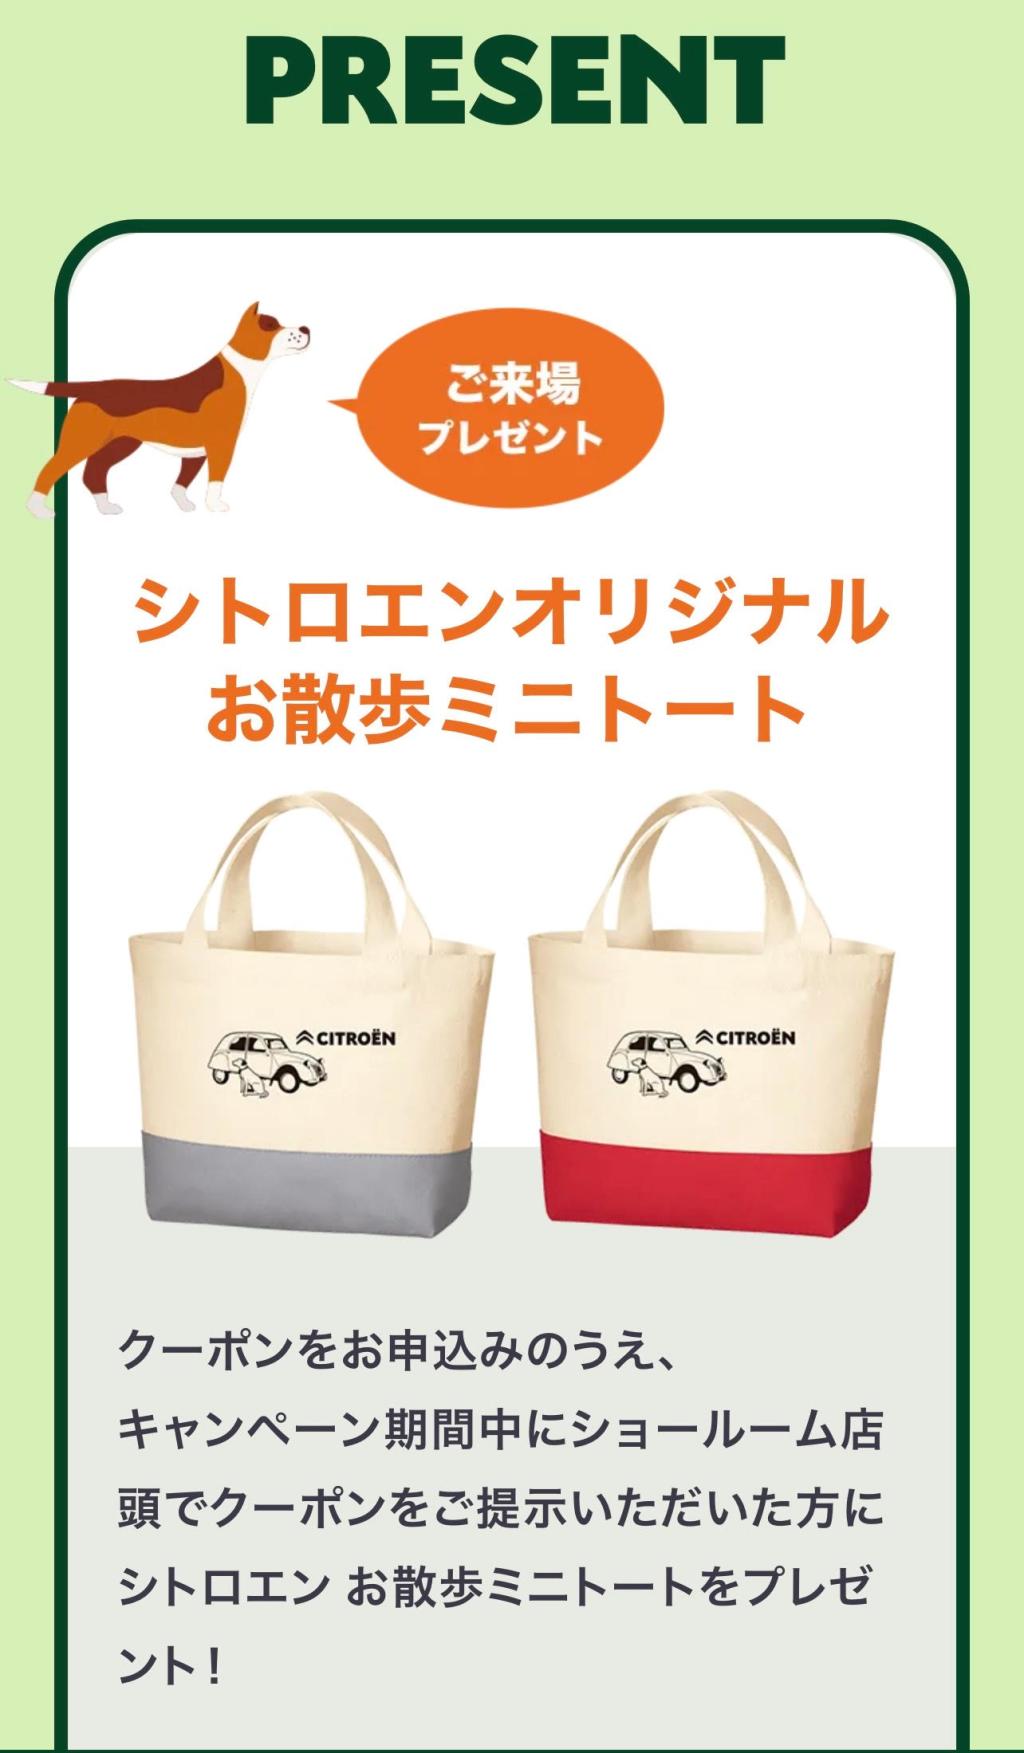 LIFE WITH PETS CAMPAIGN♪♪